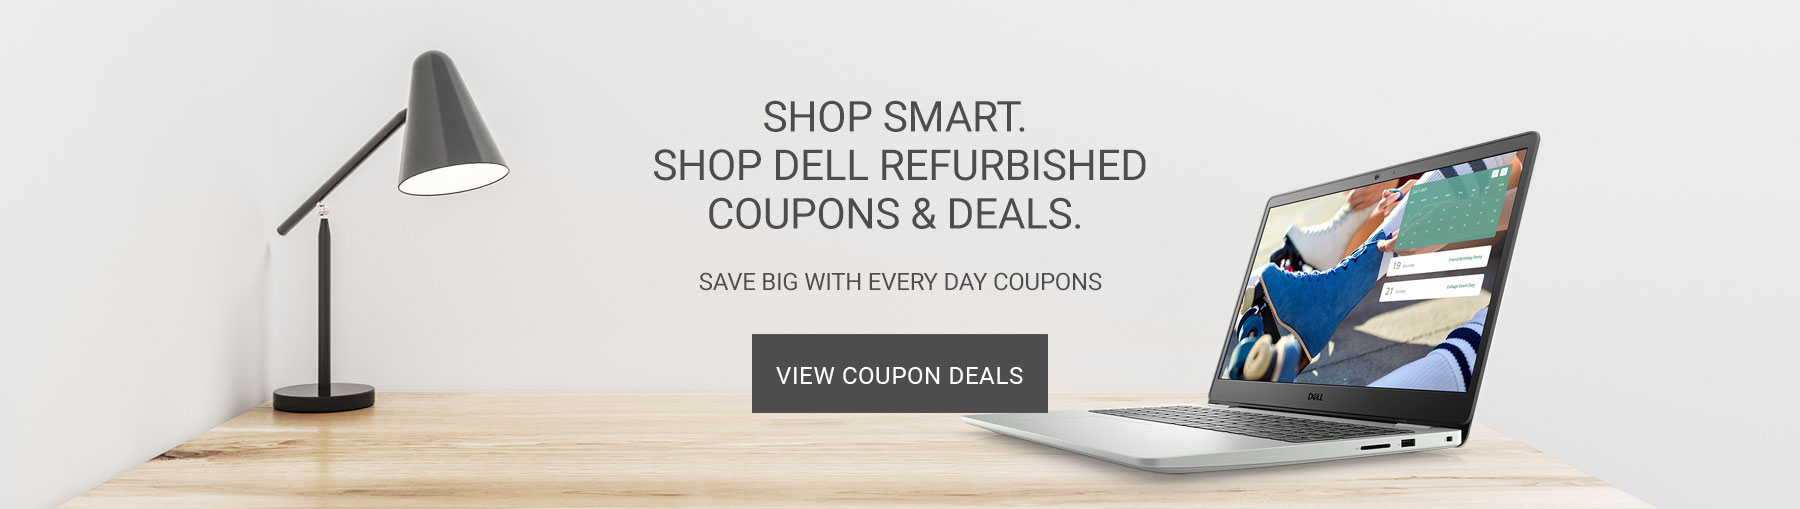 Dell Refurbished - $10 off All Extended Warranties.